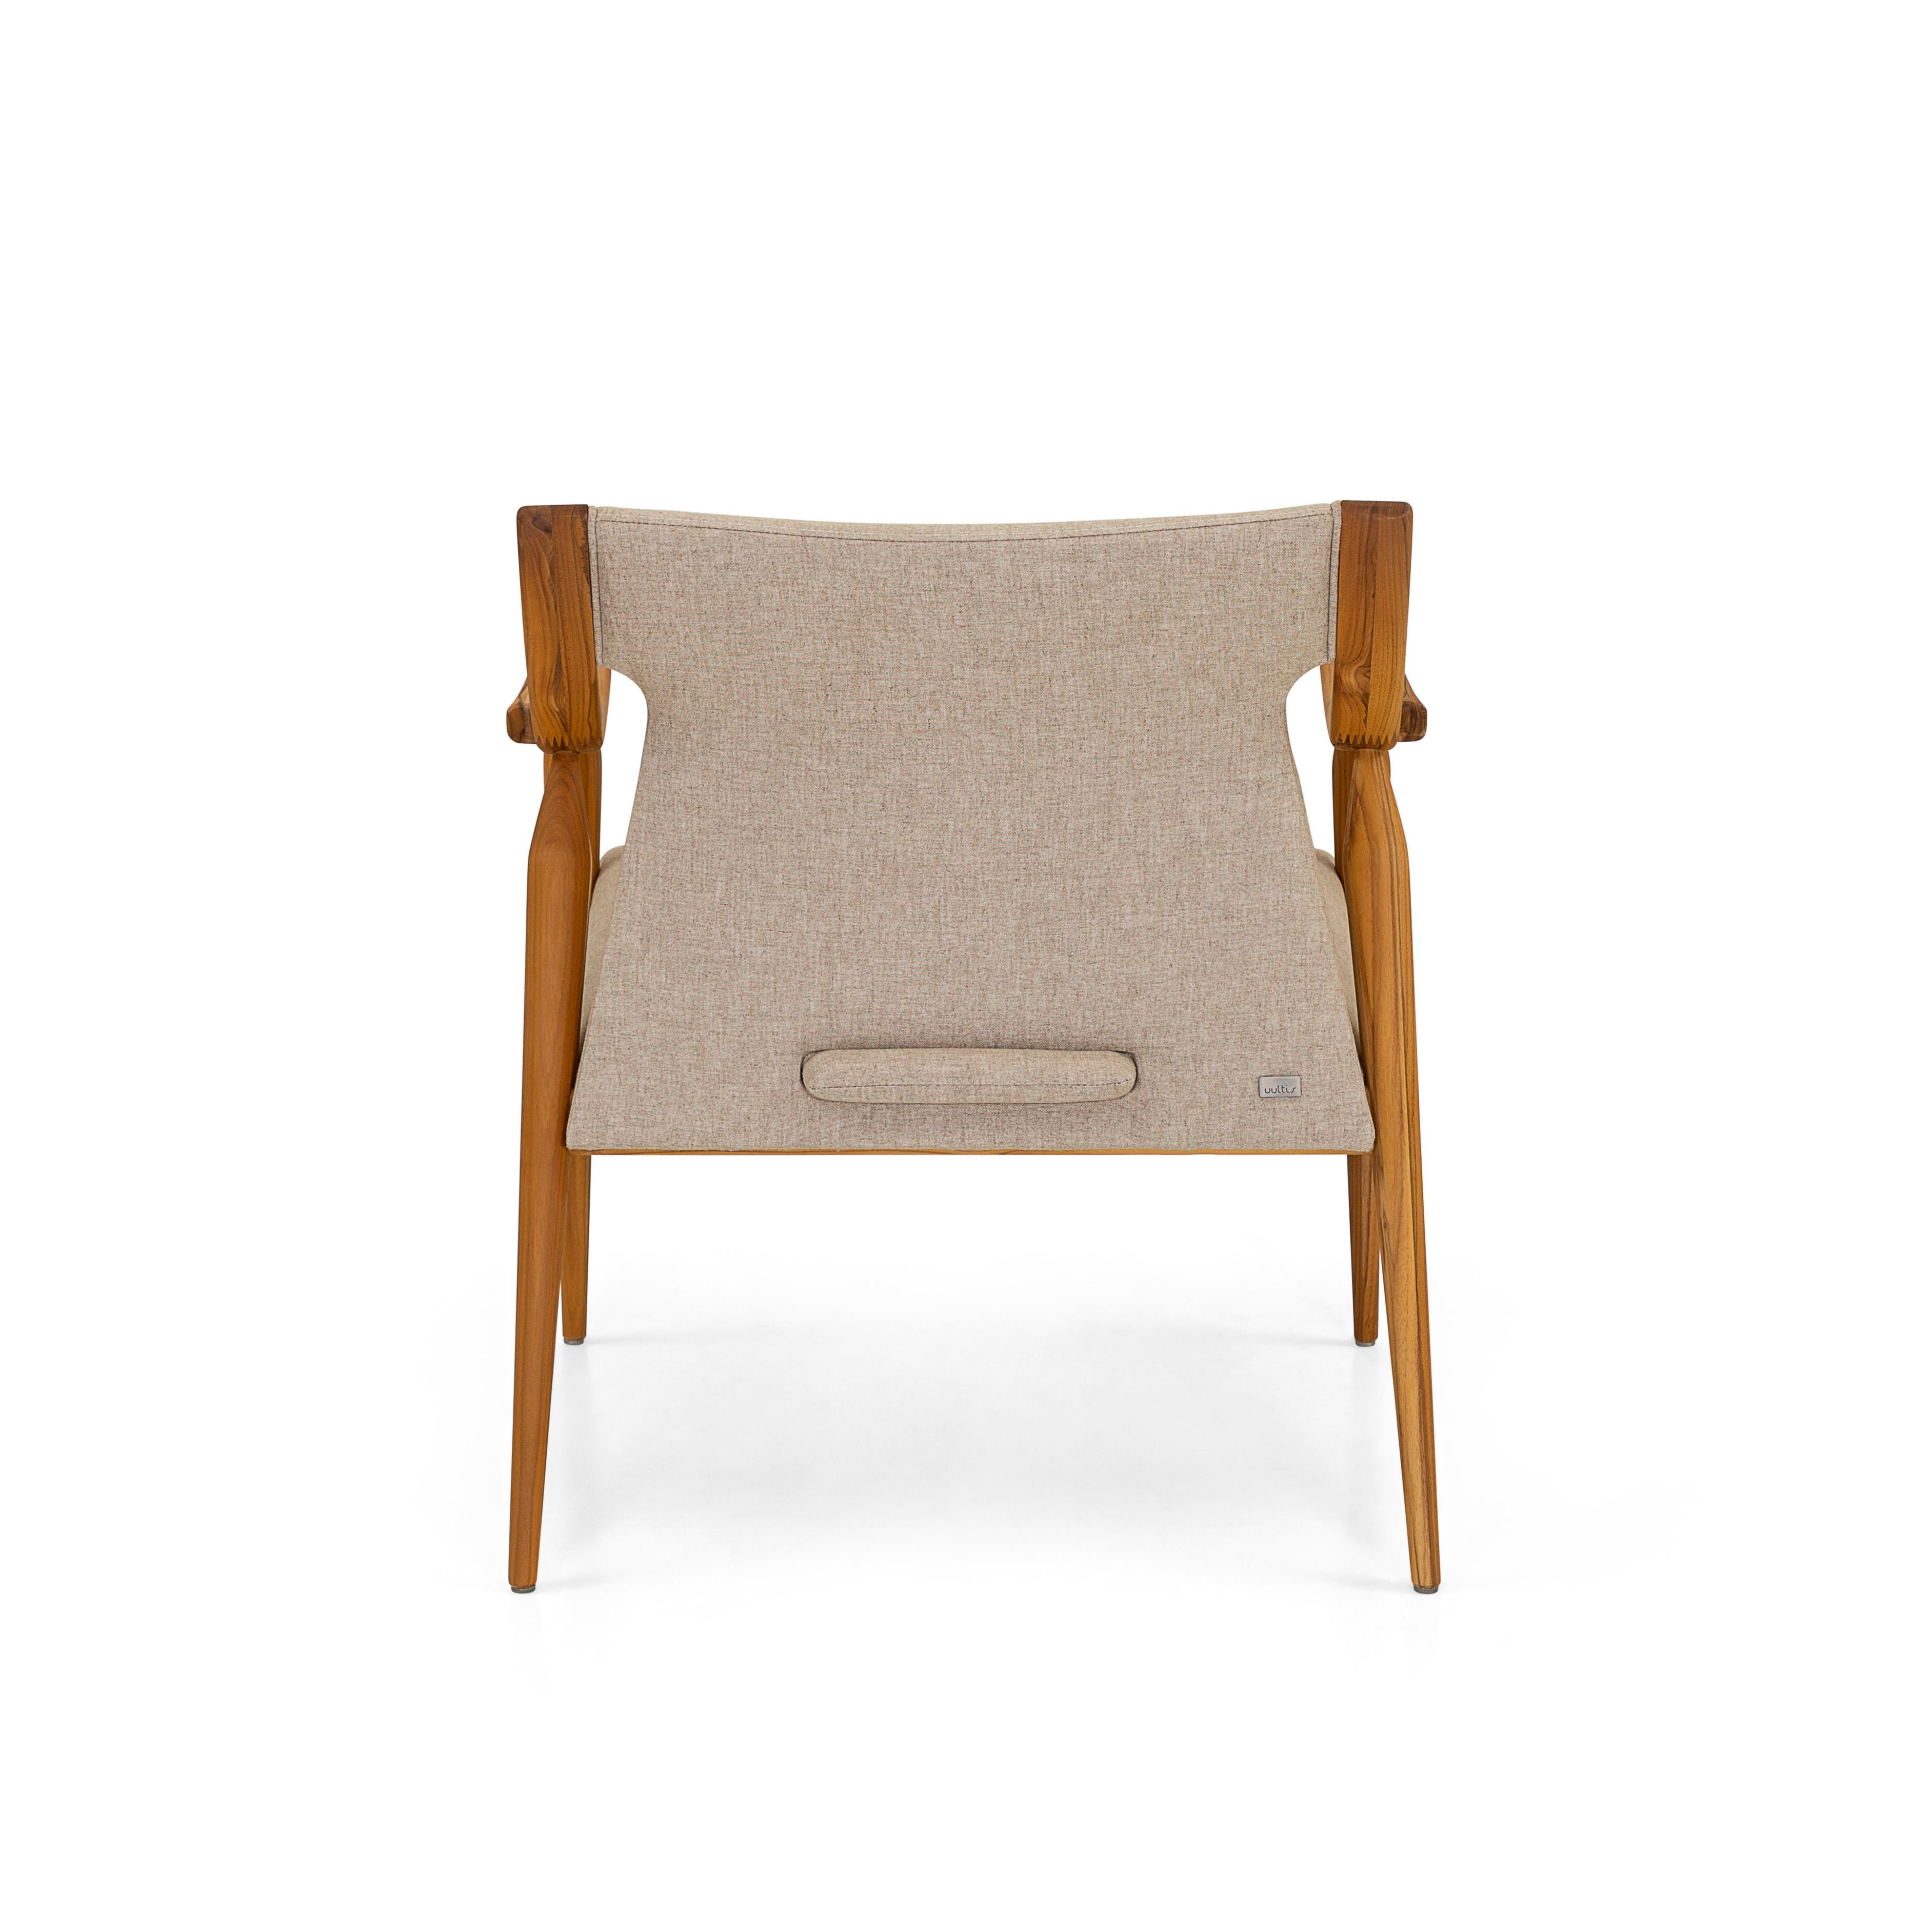 Mince Armchair Featuring Curved Arms and Spindle Legs in Teak Wood Finish In New Condition For Sale In Miami, FL